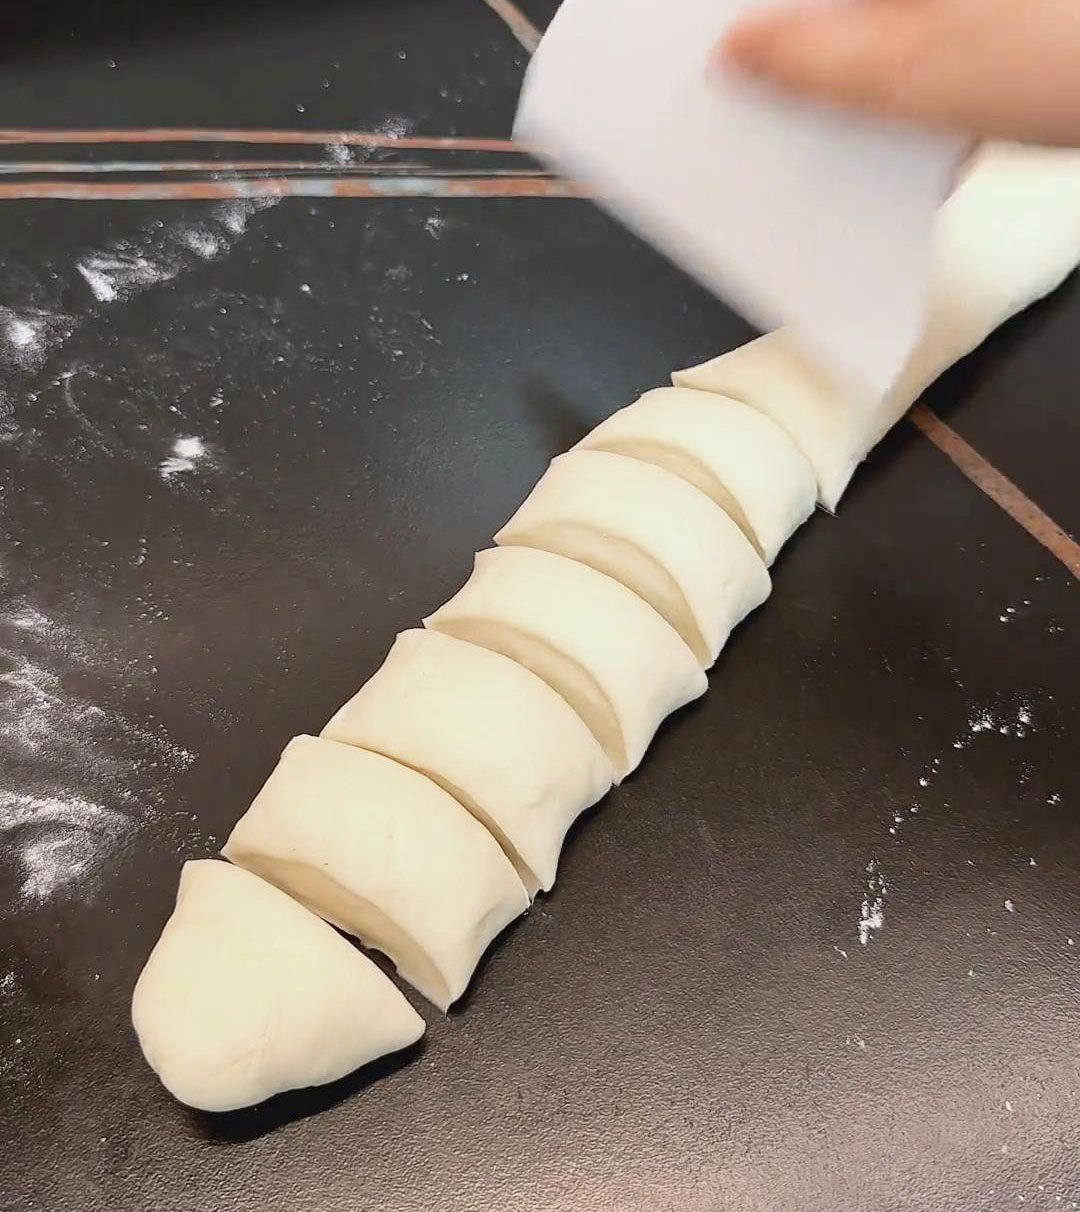 divide the dough into 30g portions